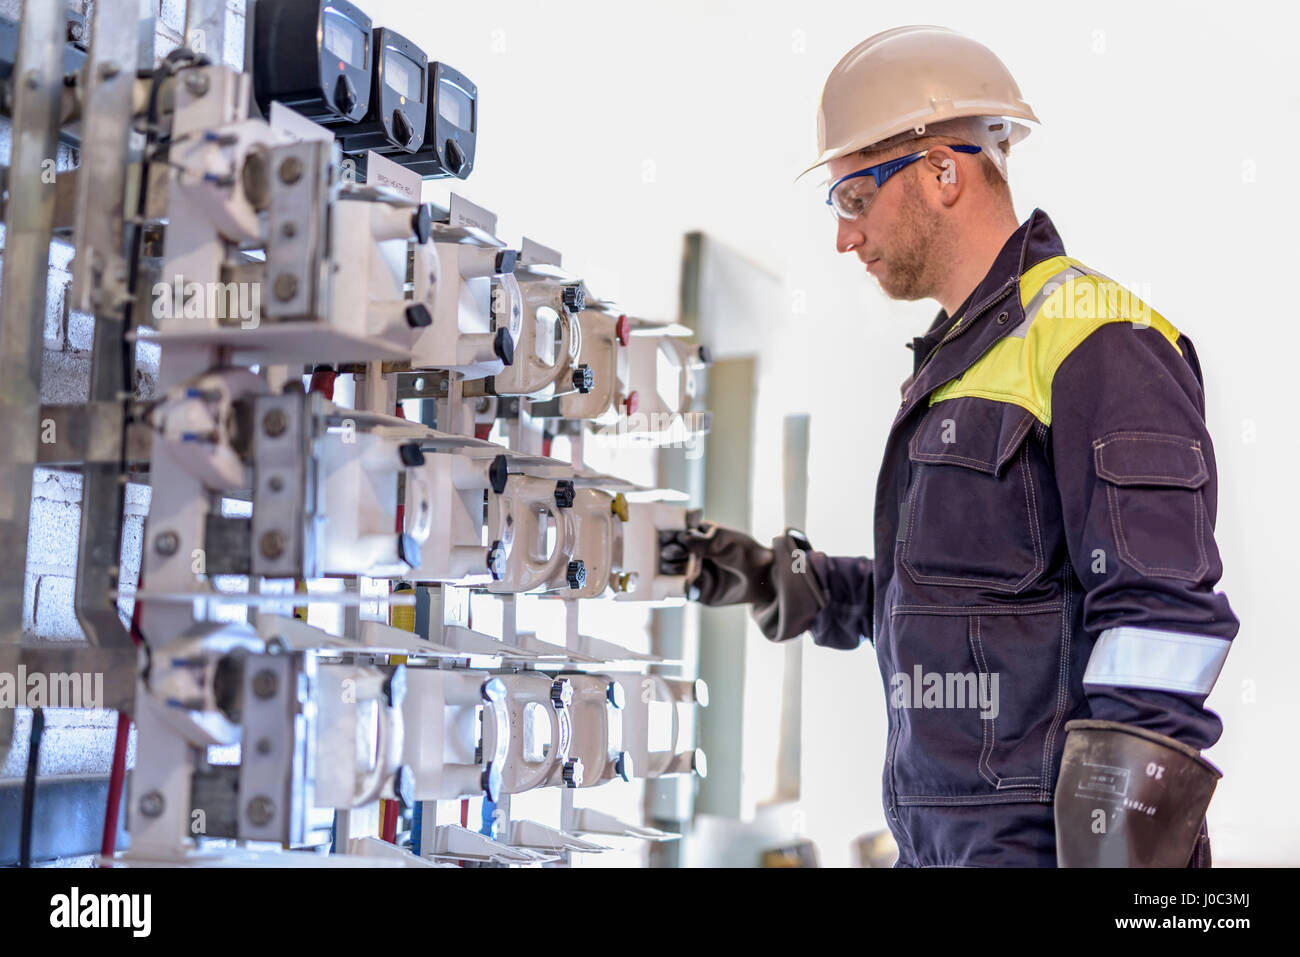 Worker testing circuit breakers in electricity substation Stock Photo